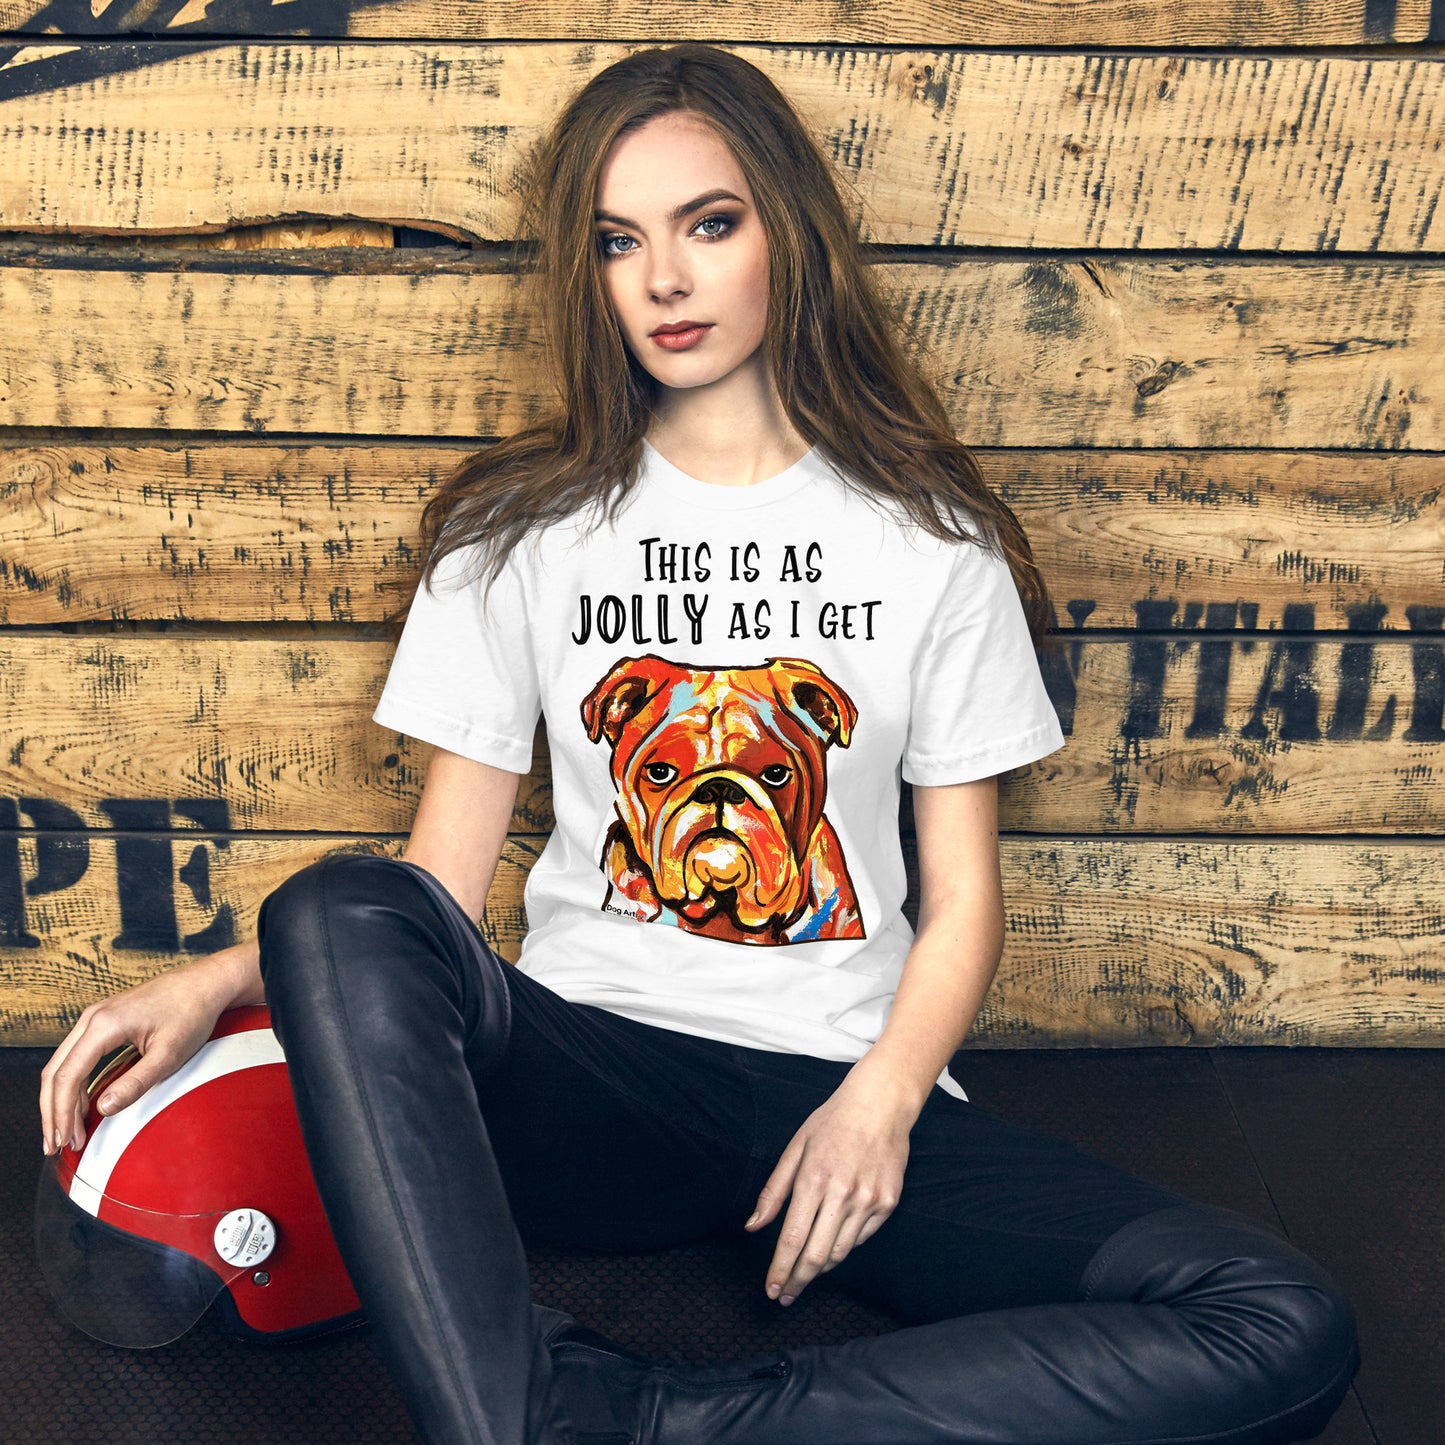 English Bulldog This Is As Jolly As I Get unisex t-shirt white by Dog Artistry